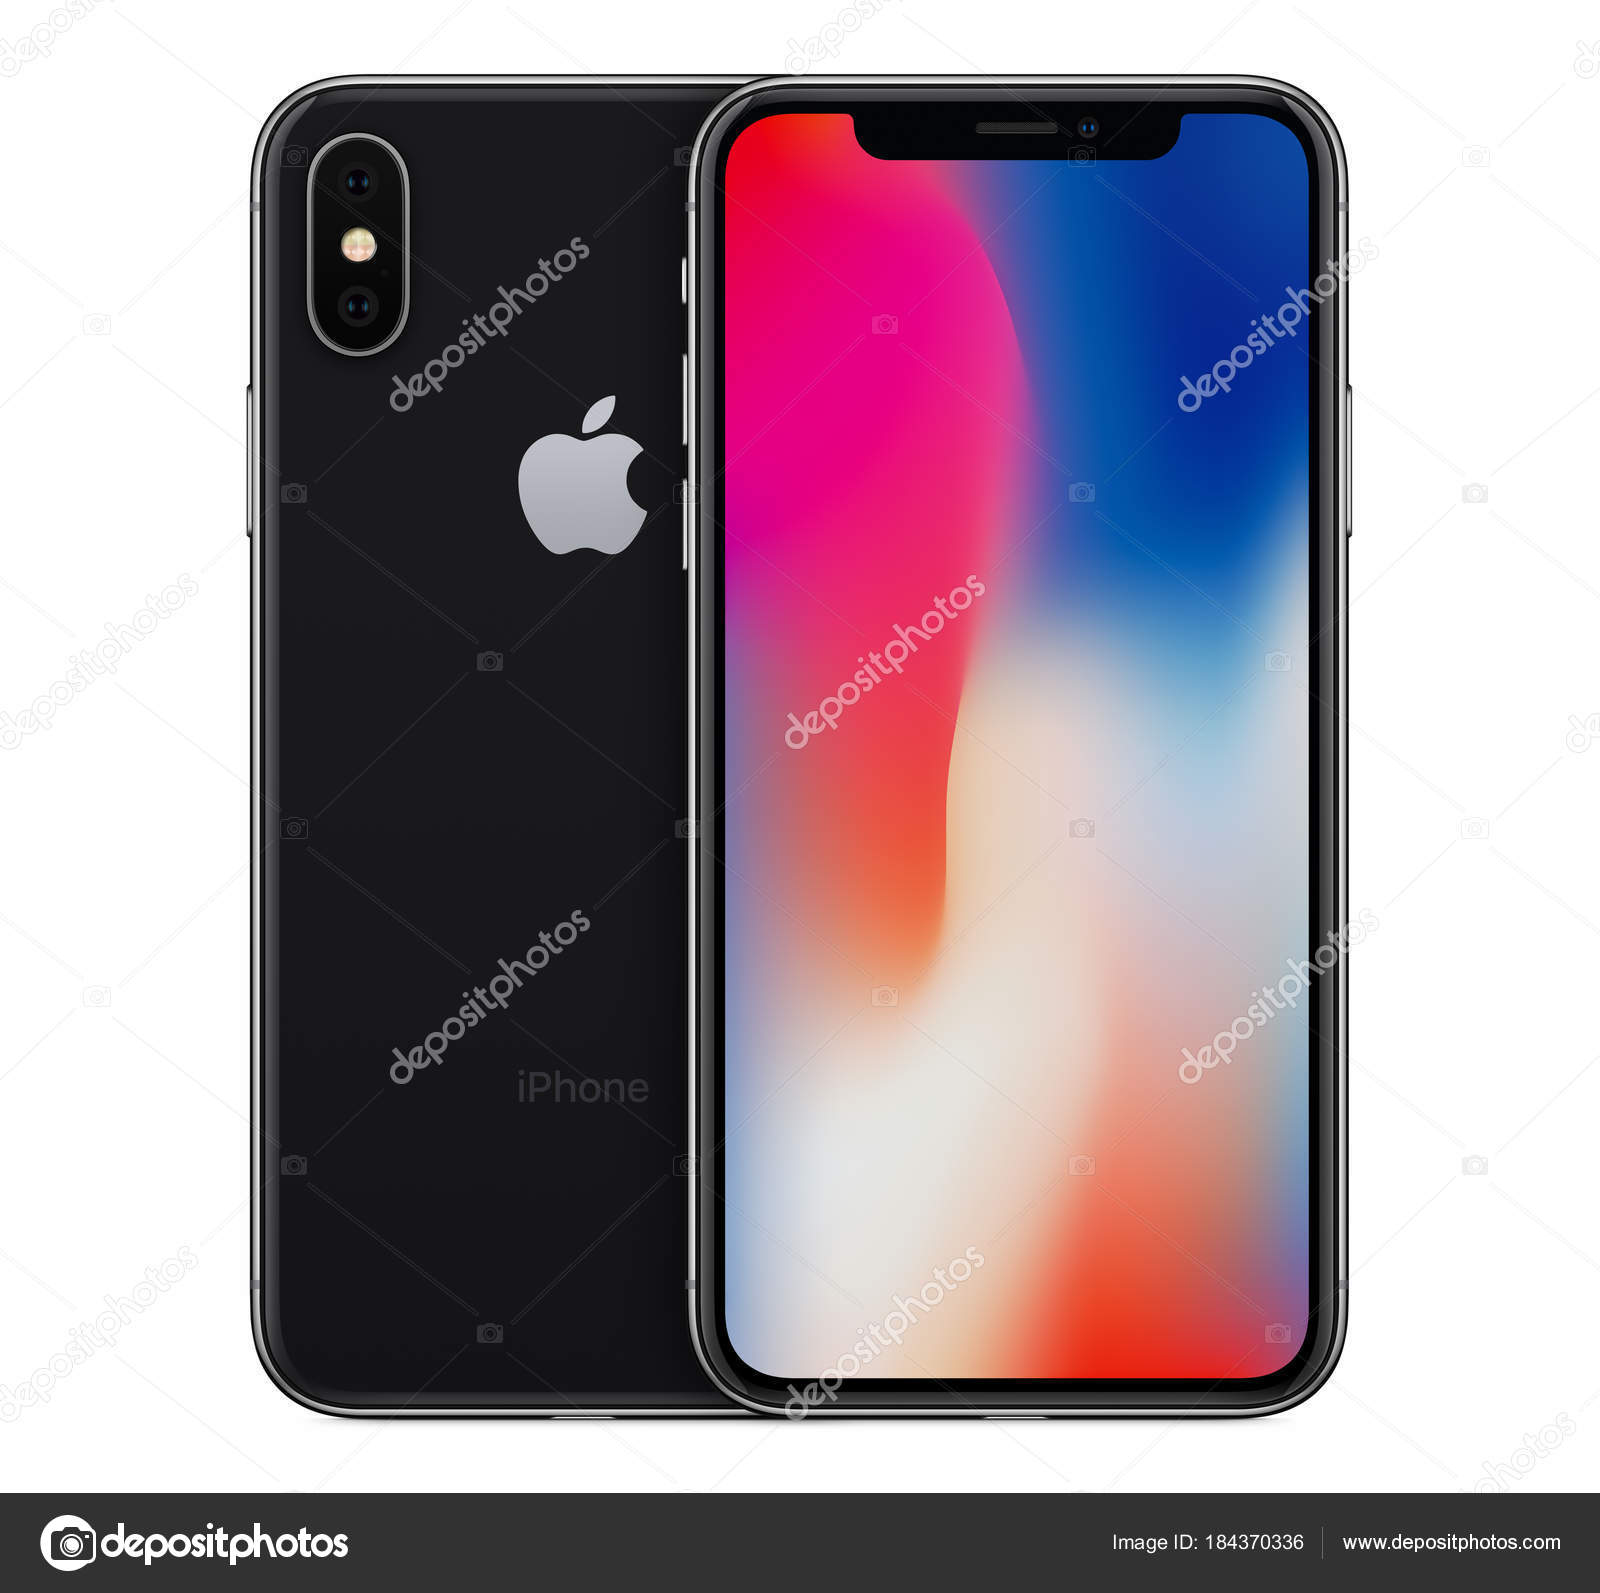 Space Wallpaper Iphone Space Gray Apple Iphone X Mockup Front View With Wallpaper Screen And Iphone 10 Back Side Behind It Stock Editorial Photo C Alexey Boldin